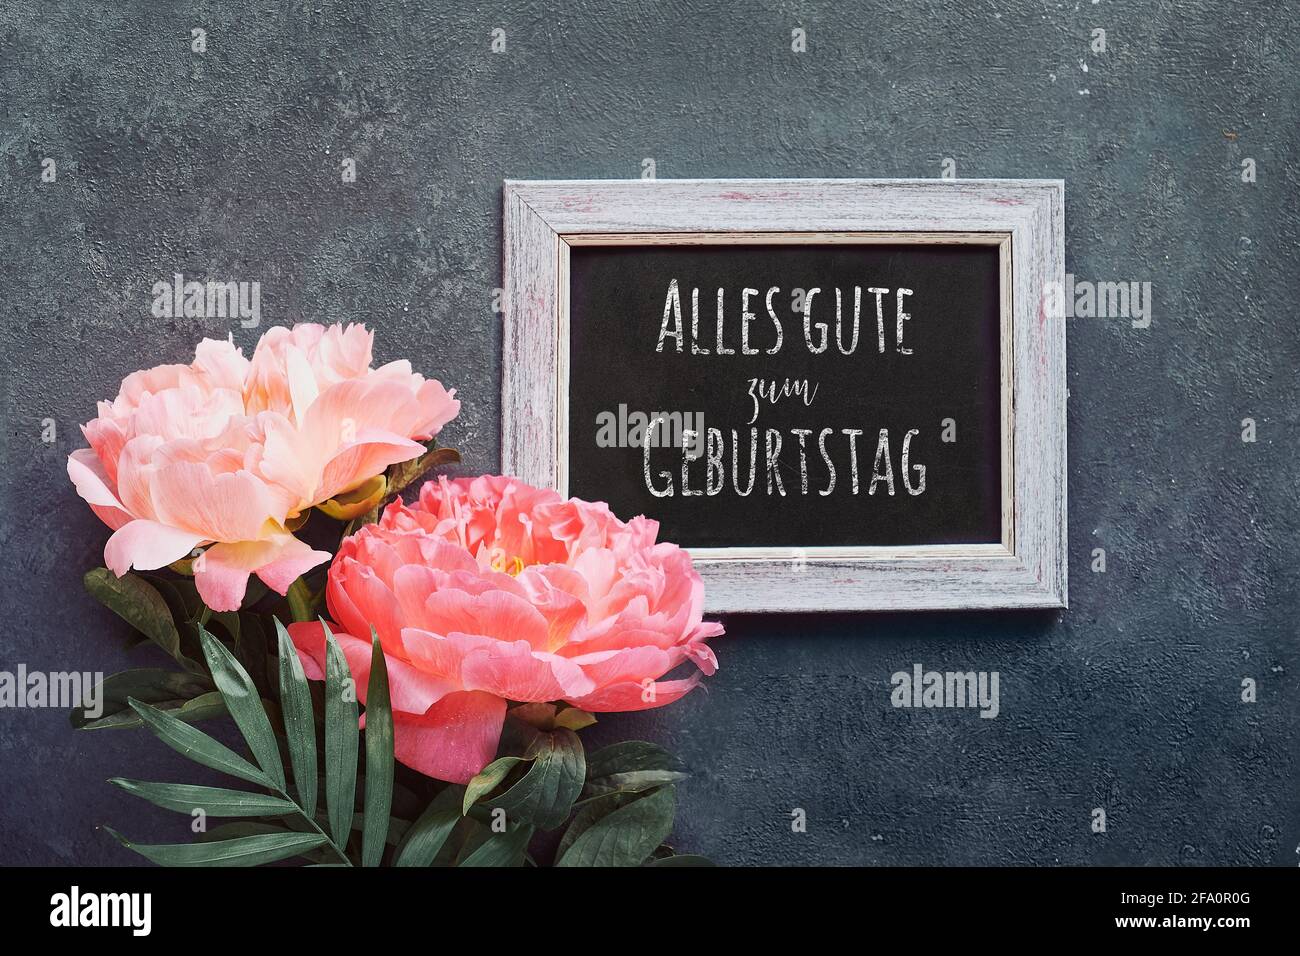 Alles gute zum Geburtstag means Happy Birthday in German language. Greeting card, peony and paper confetti, circles. Single flower and white frame on Stock Photo